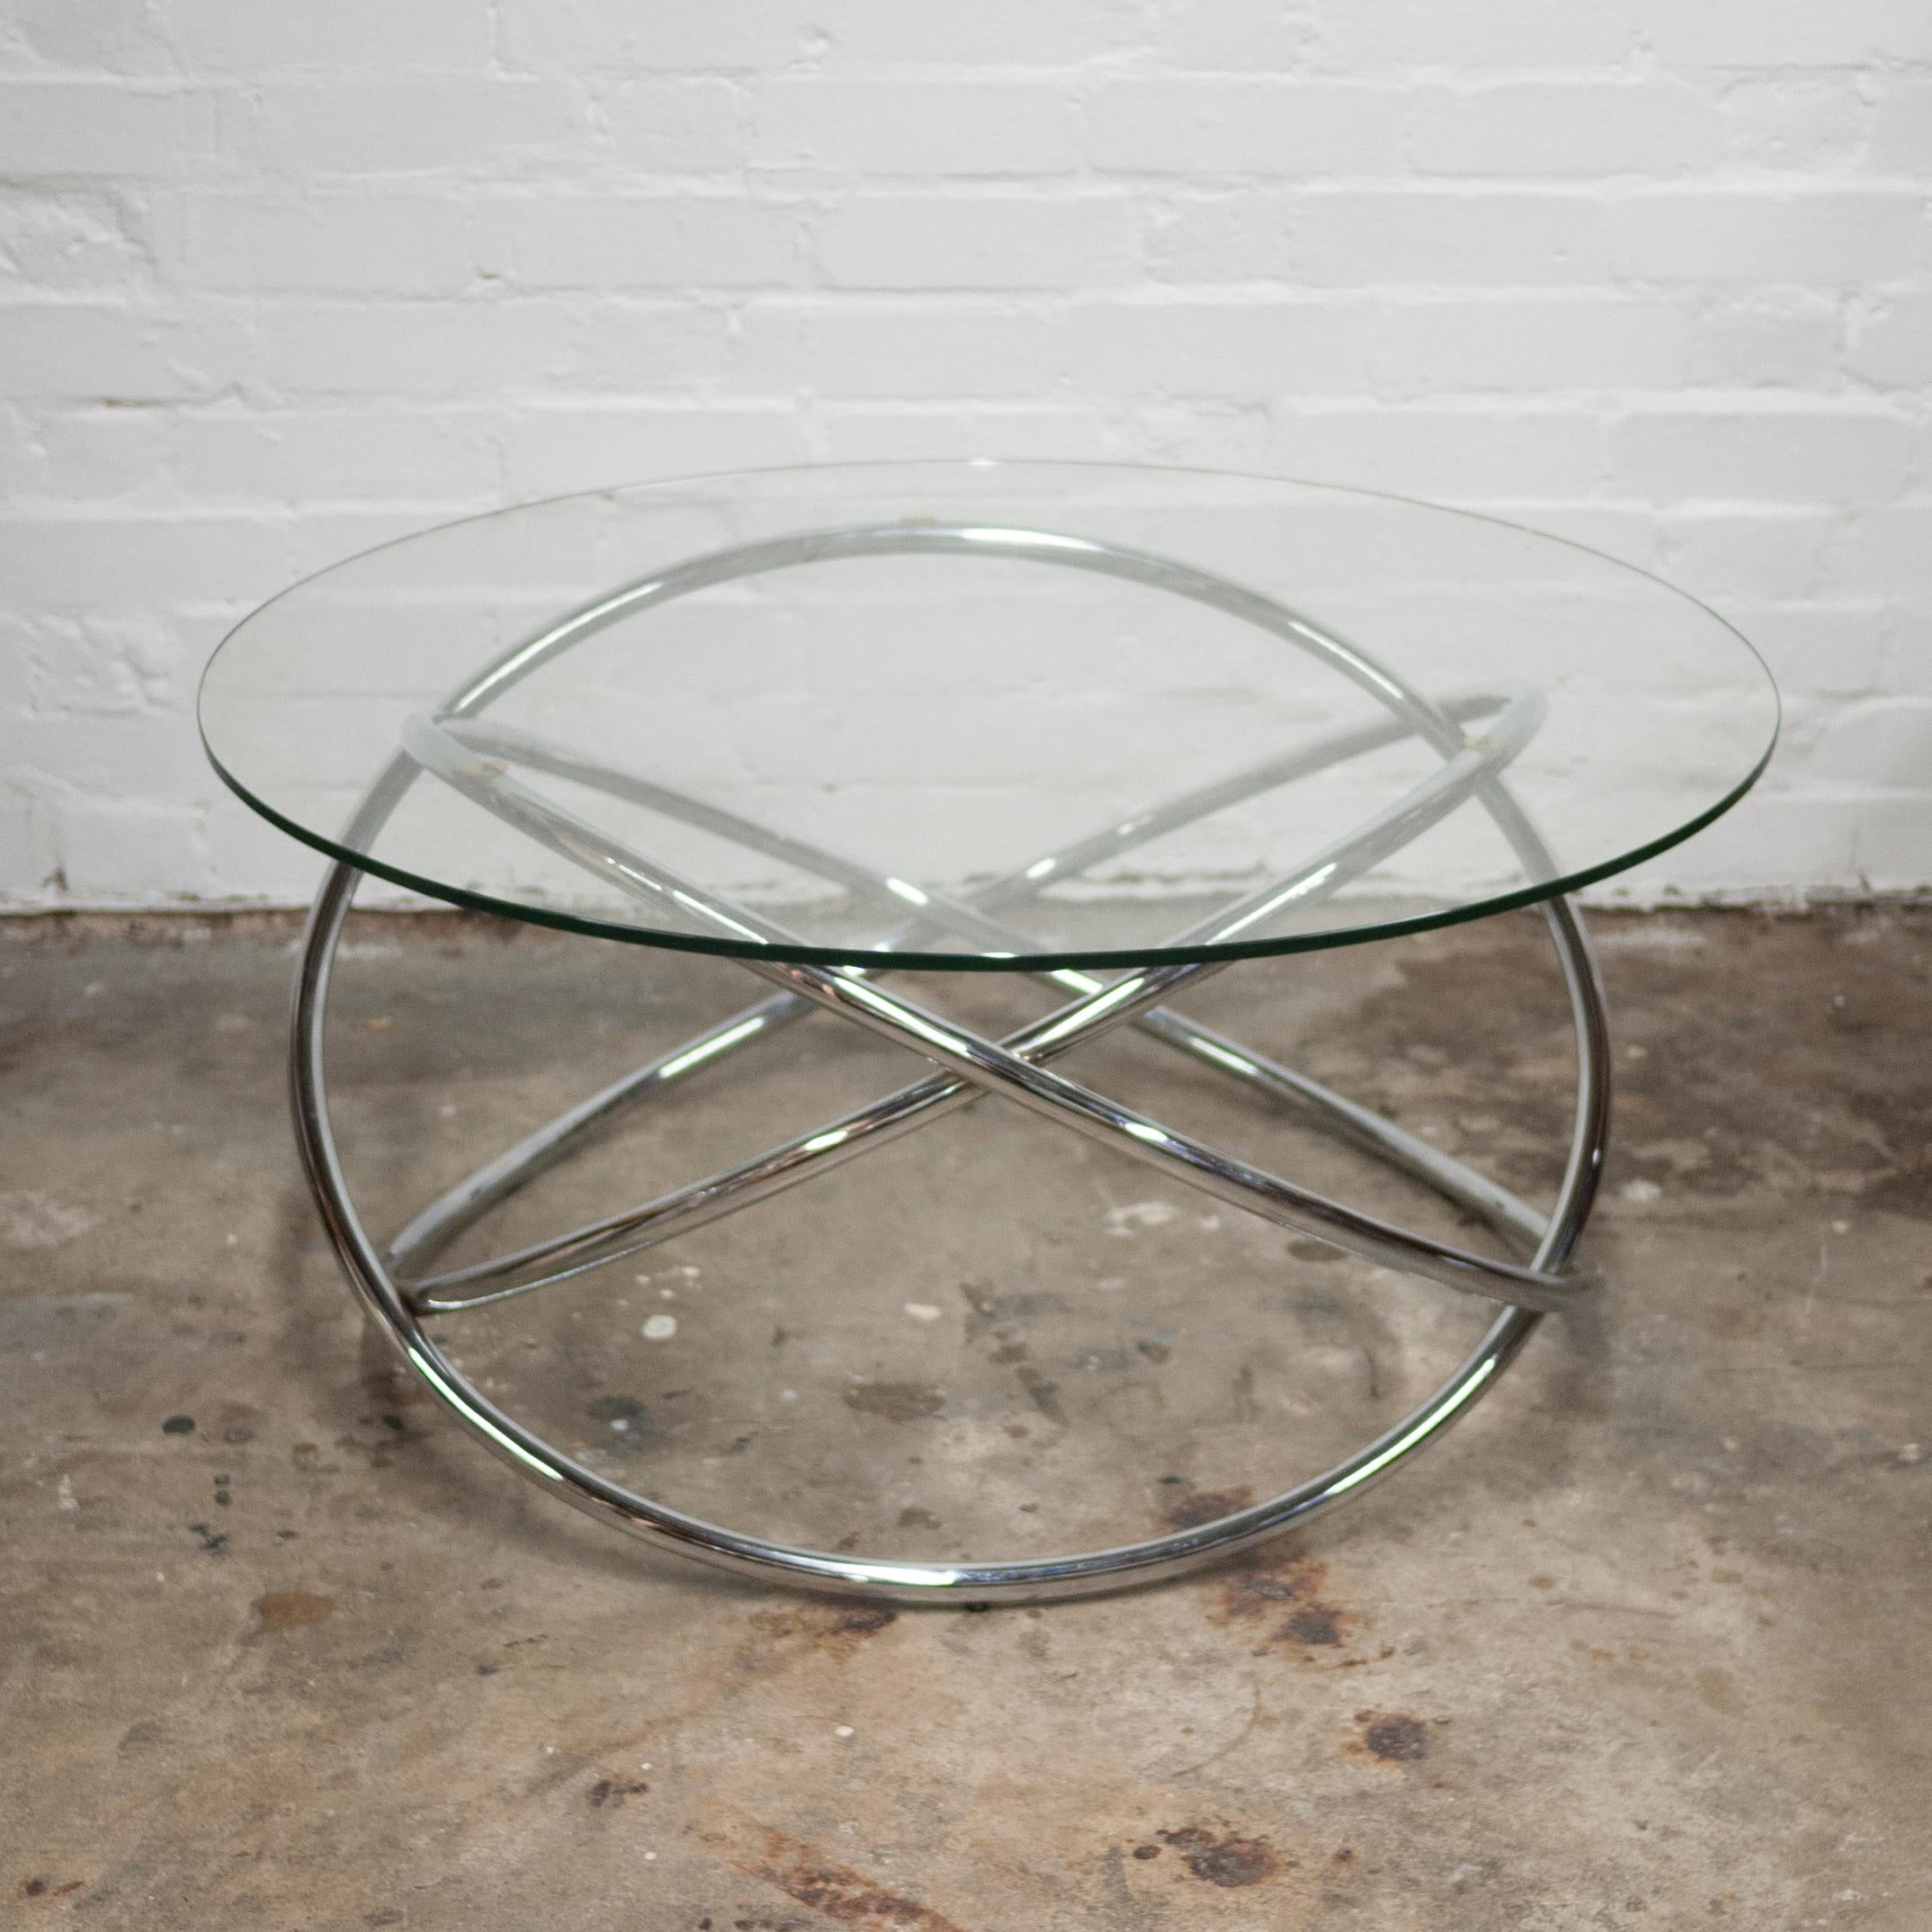 Late 20th Century Vintage Italian Space Age Glass and Chrome Spiral Base Coffee Table, 1970s For Sale